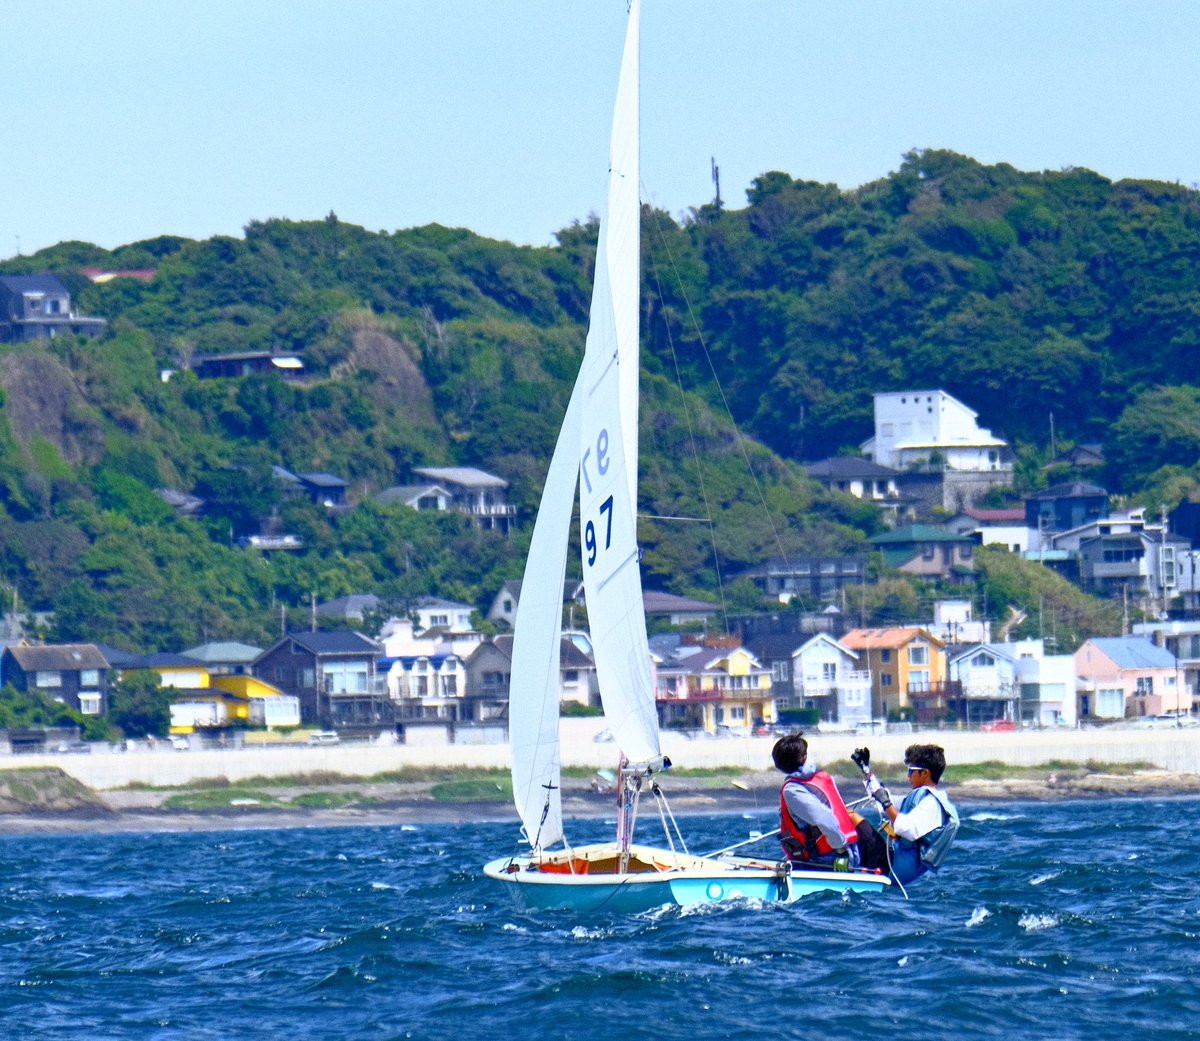 This is the official site of K16 and International14 sailing competition in Enoshima Japan. 

#ヨット #autogramtags #ボート #k16class #ヨットハーバー #セーリング #カモメ #sailing #GetinstaLike #love #tweegram #photooftheday #20like #amazing #look #instalike #instagood #instacool